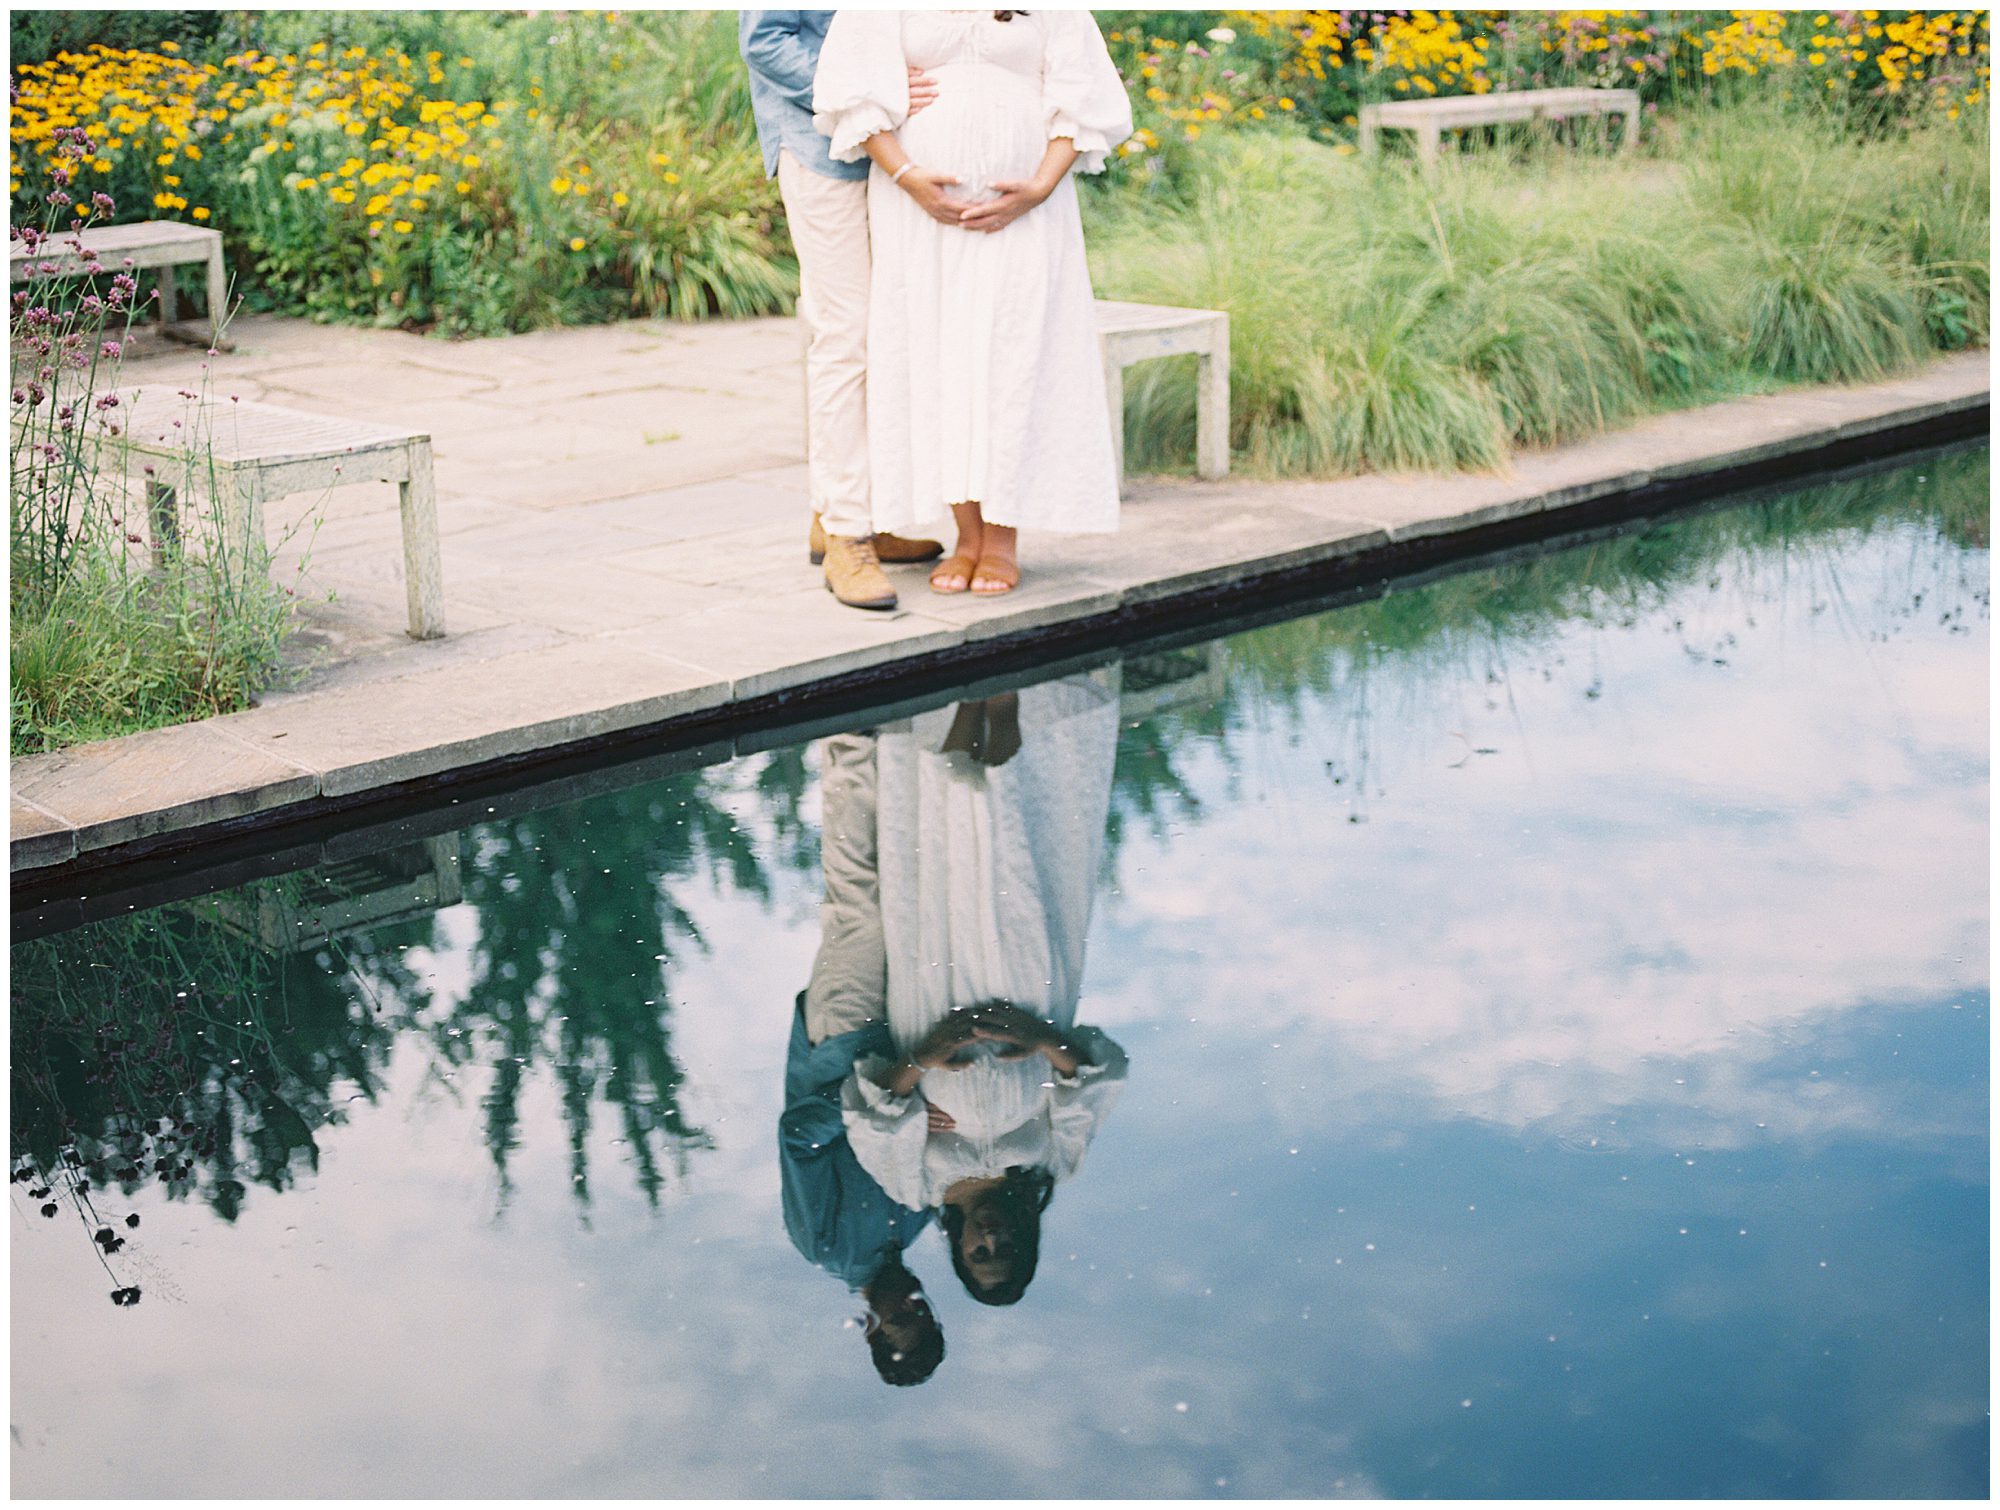 Reflection of expecting couple standing together at edge of a pond during their floral maternity session.